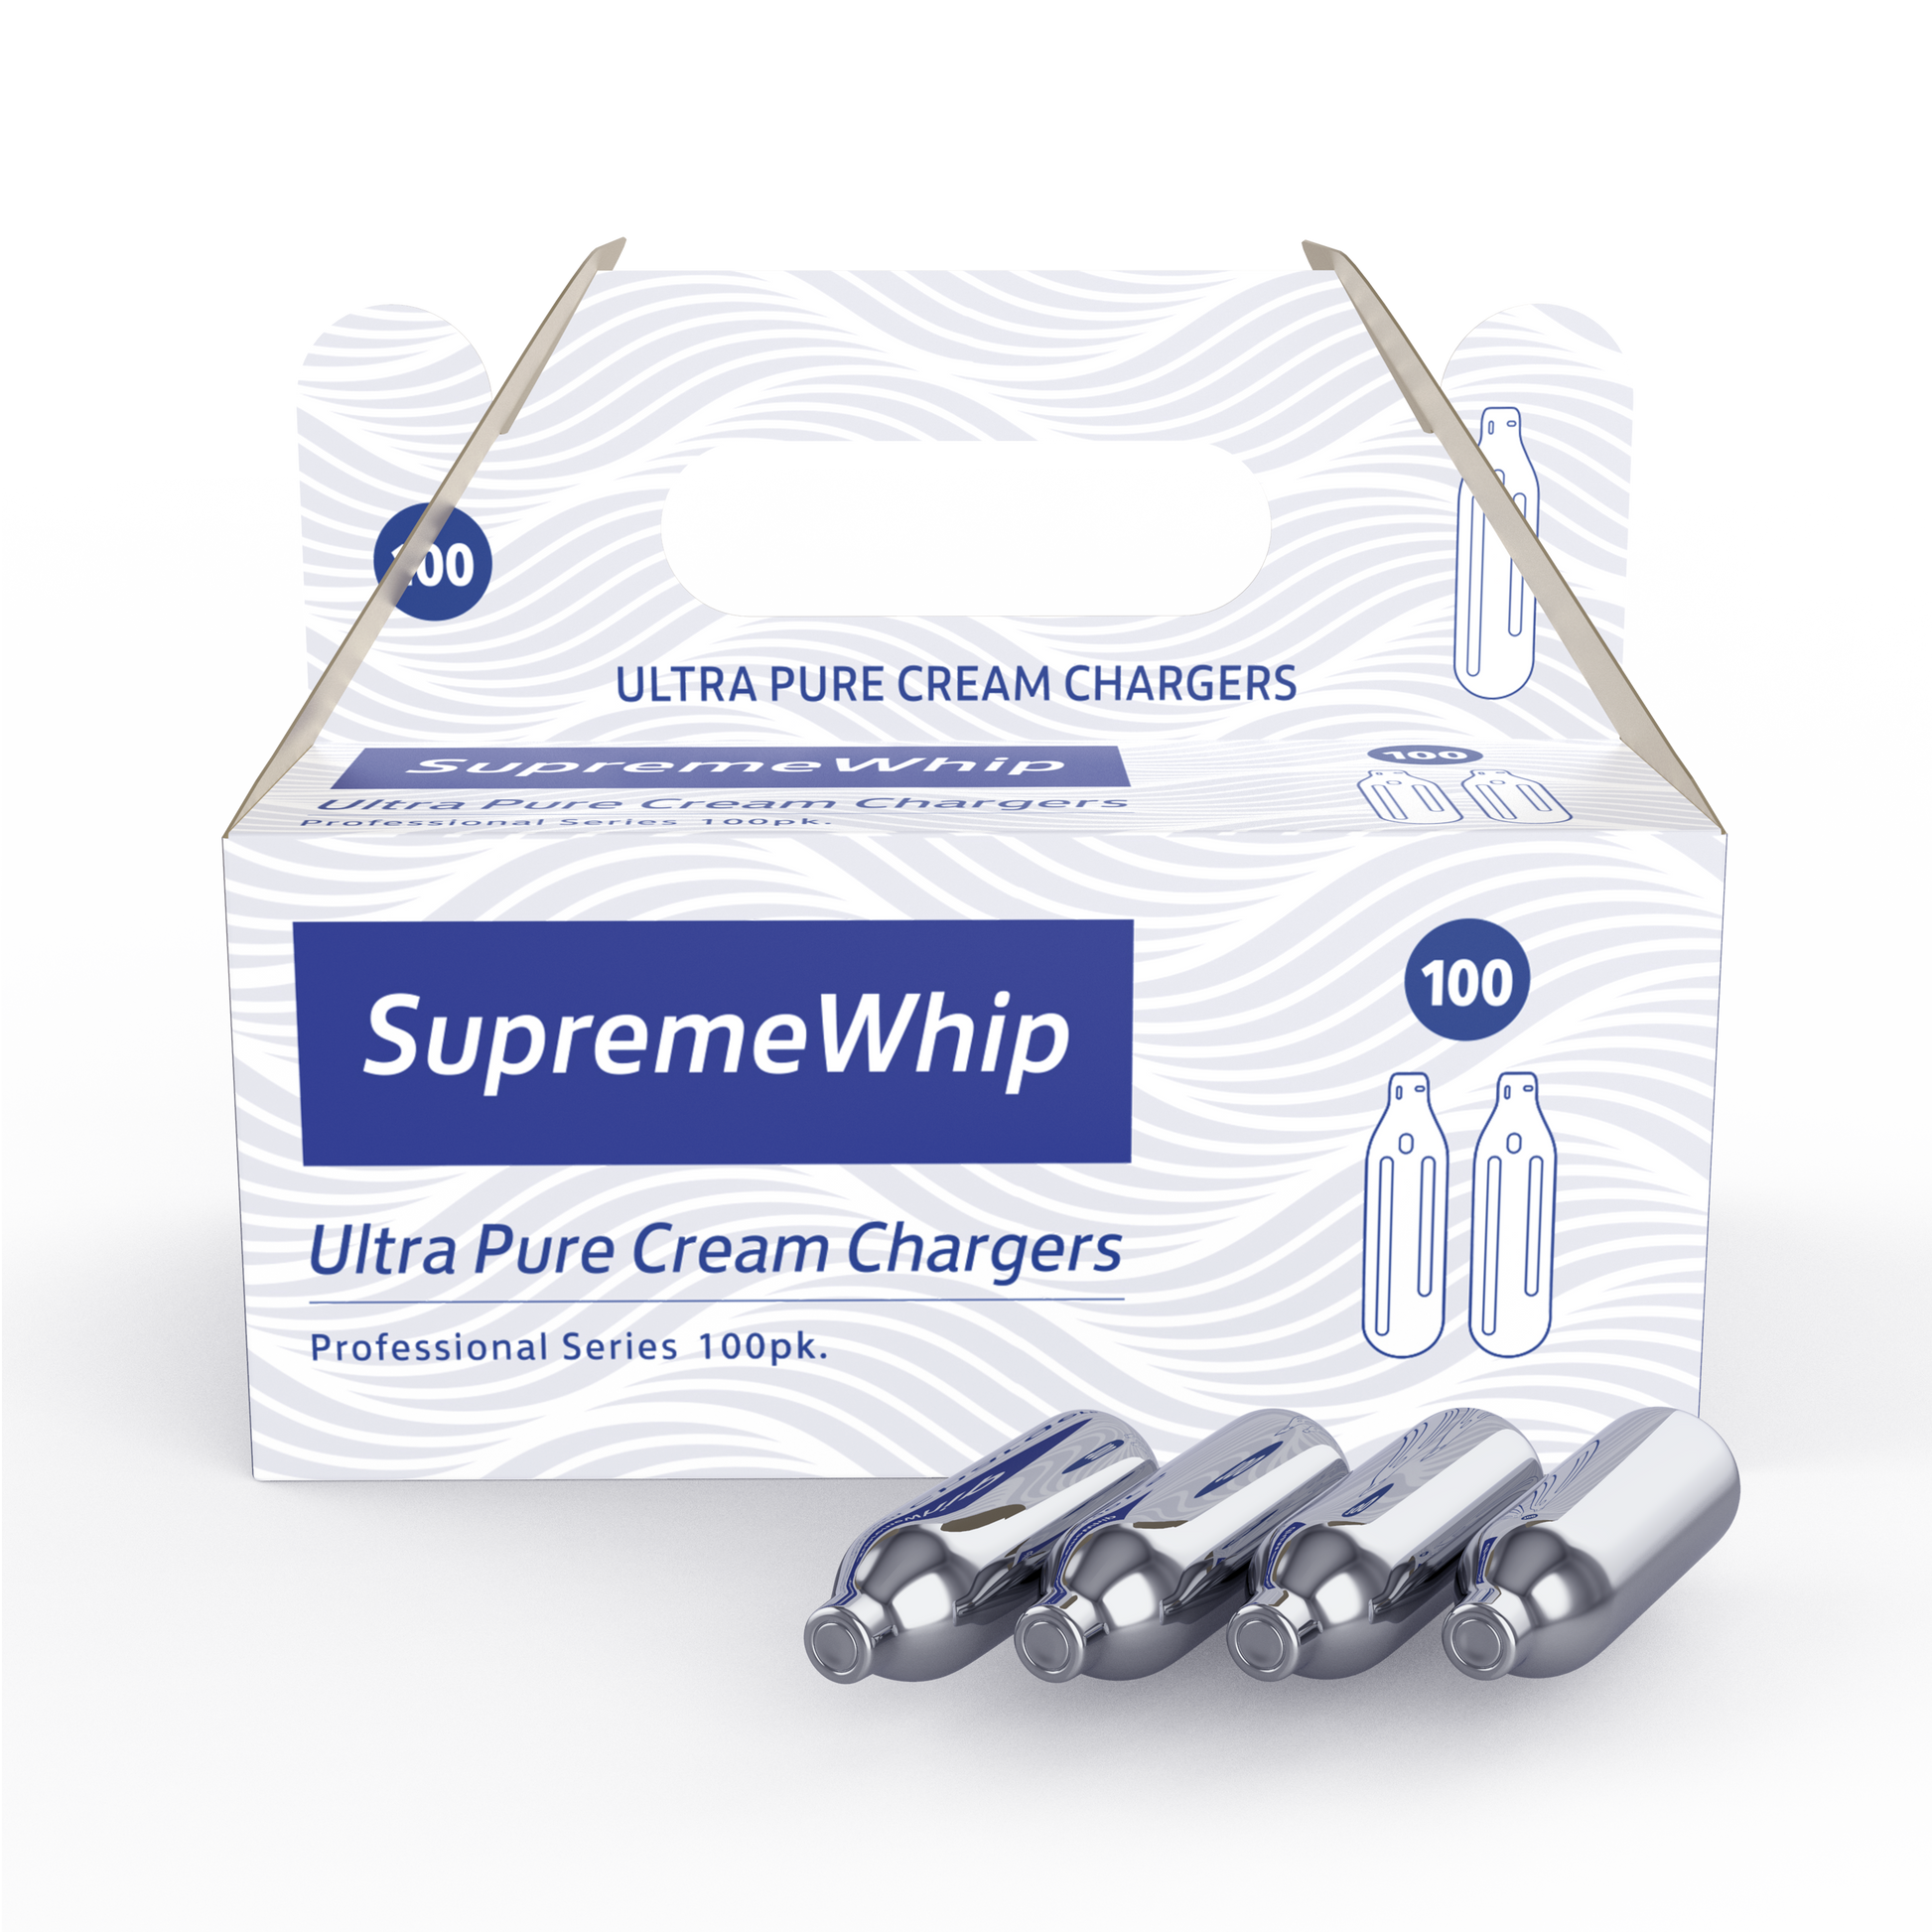 Professional Series Cream Chargers